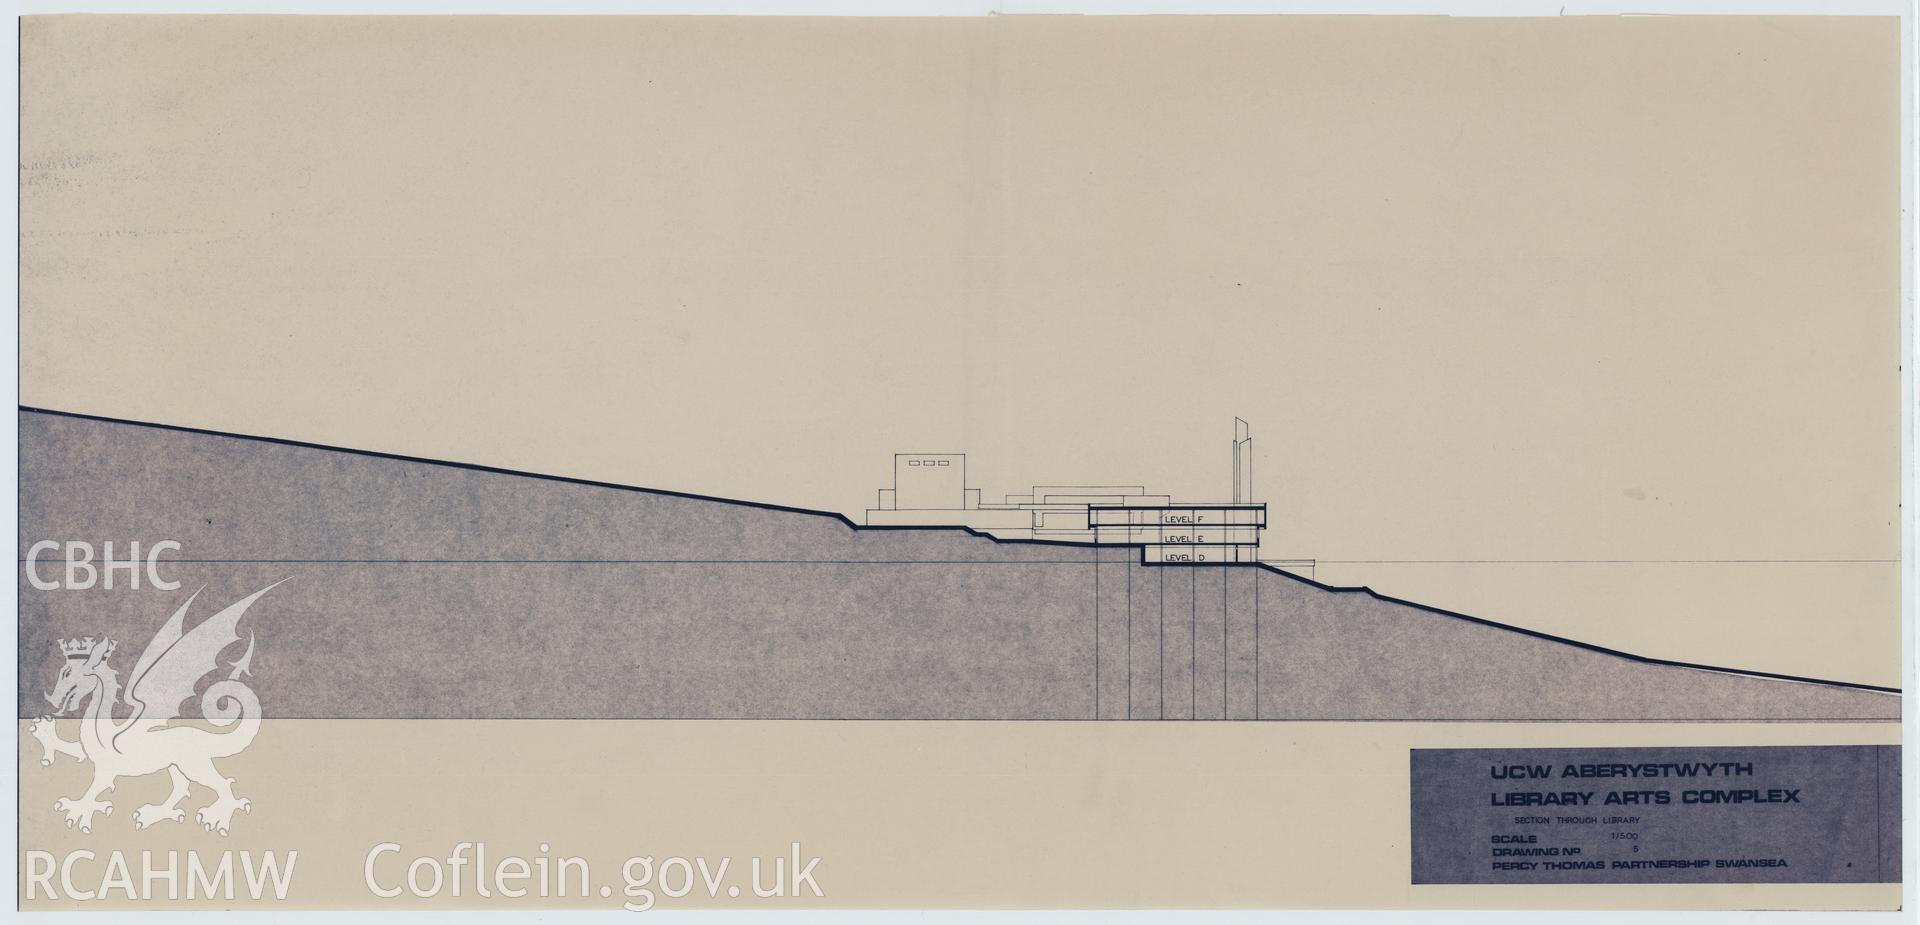 Digital copy of Drawing No 5, section through library at the proposed Library Arts Complex at University College Aberystwyth, produced by Percy Thomas Partnership. Scale 1:500.